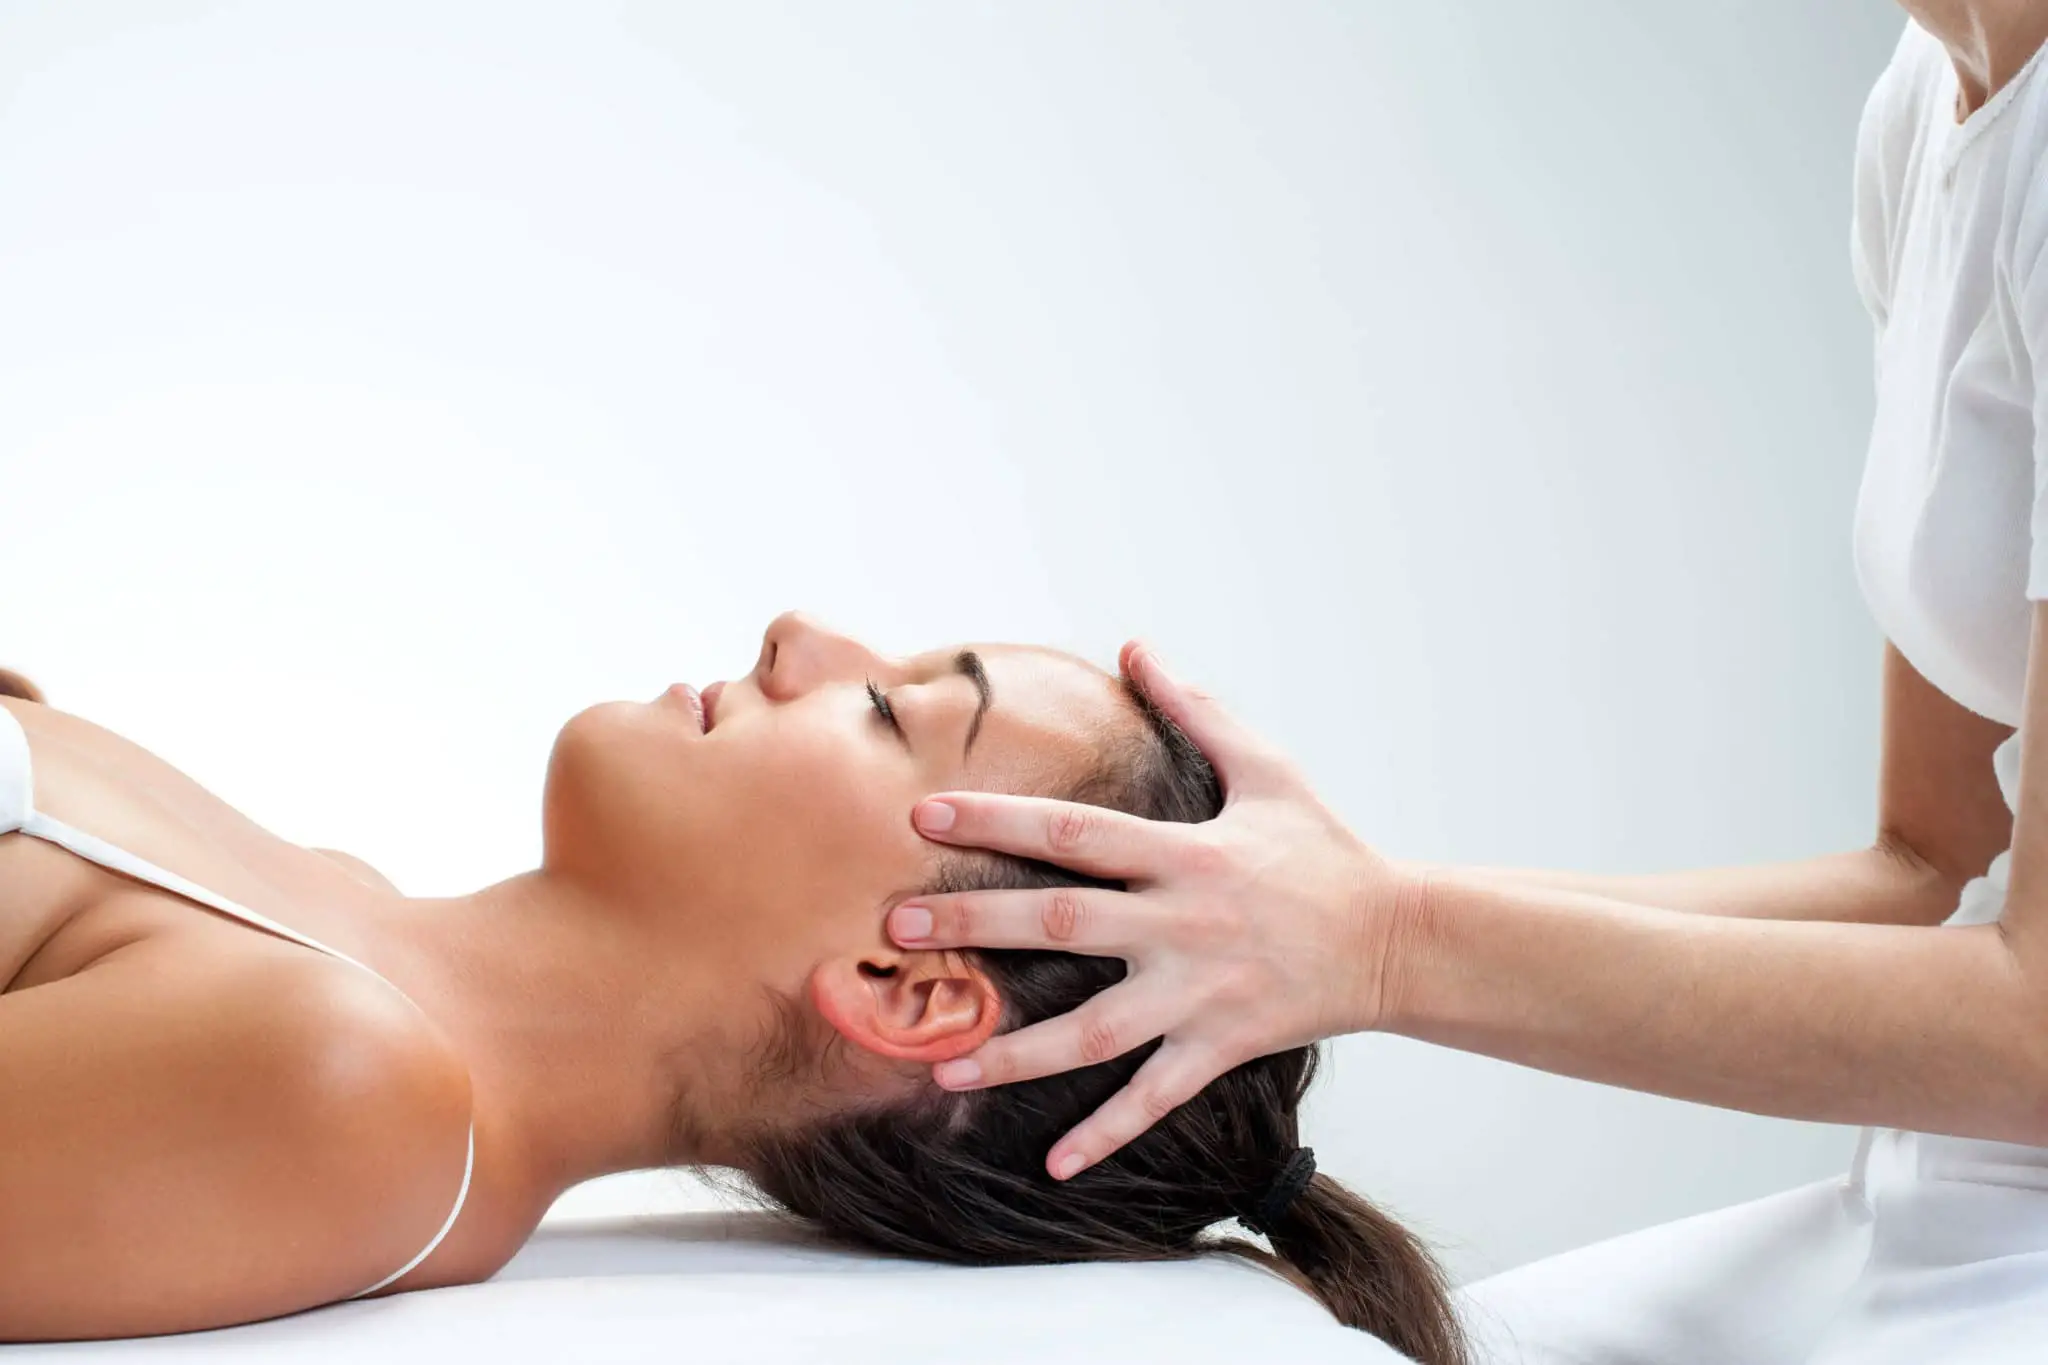 What Can I Expect When I Visit a Chiropractor?